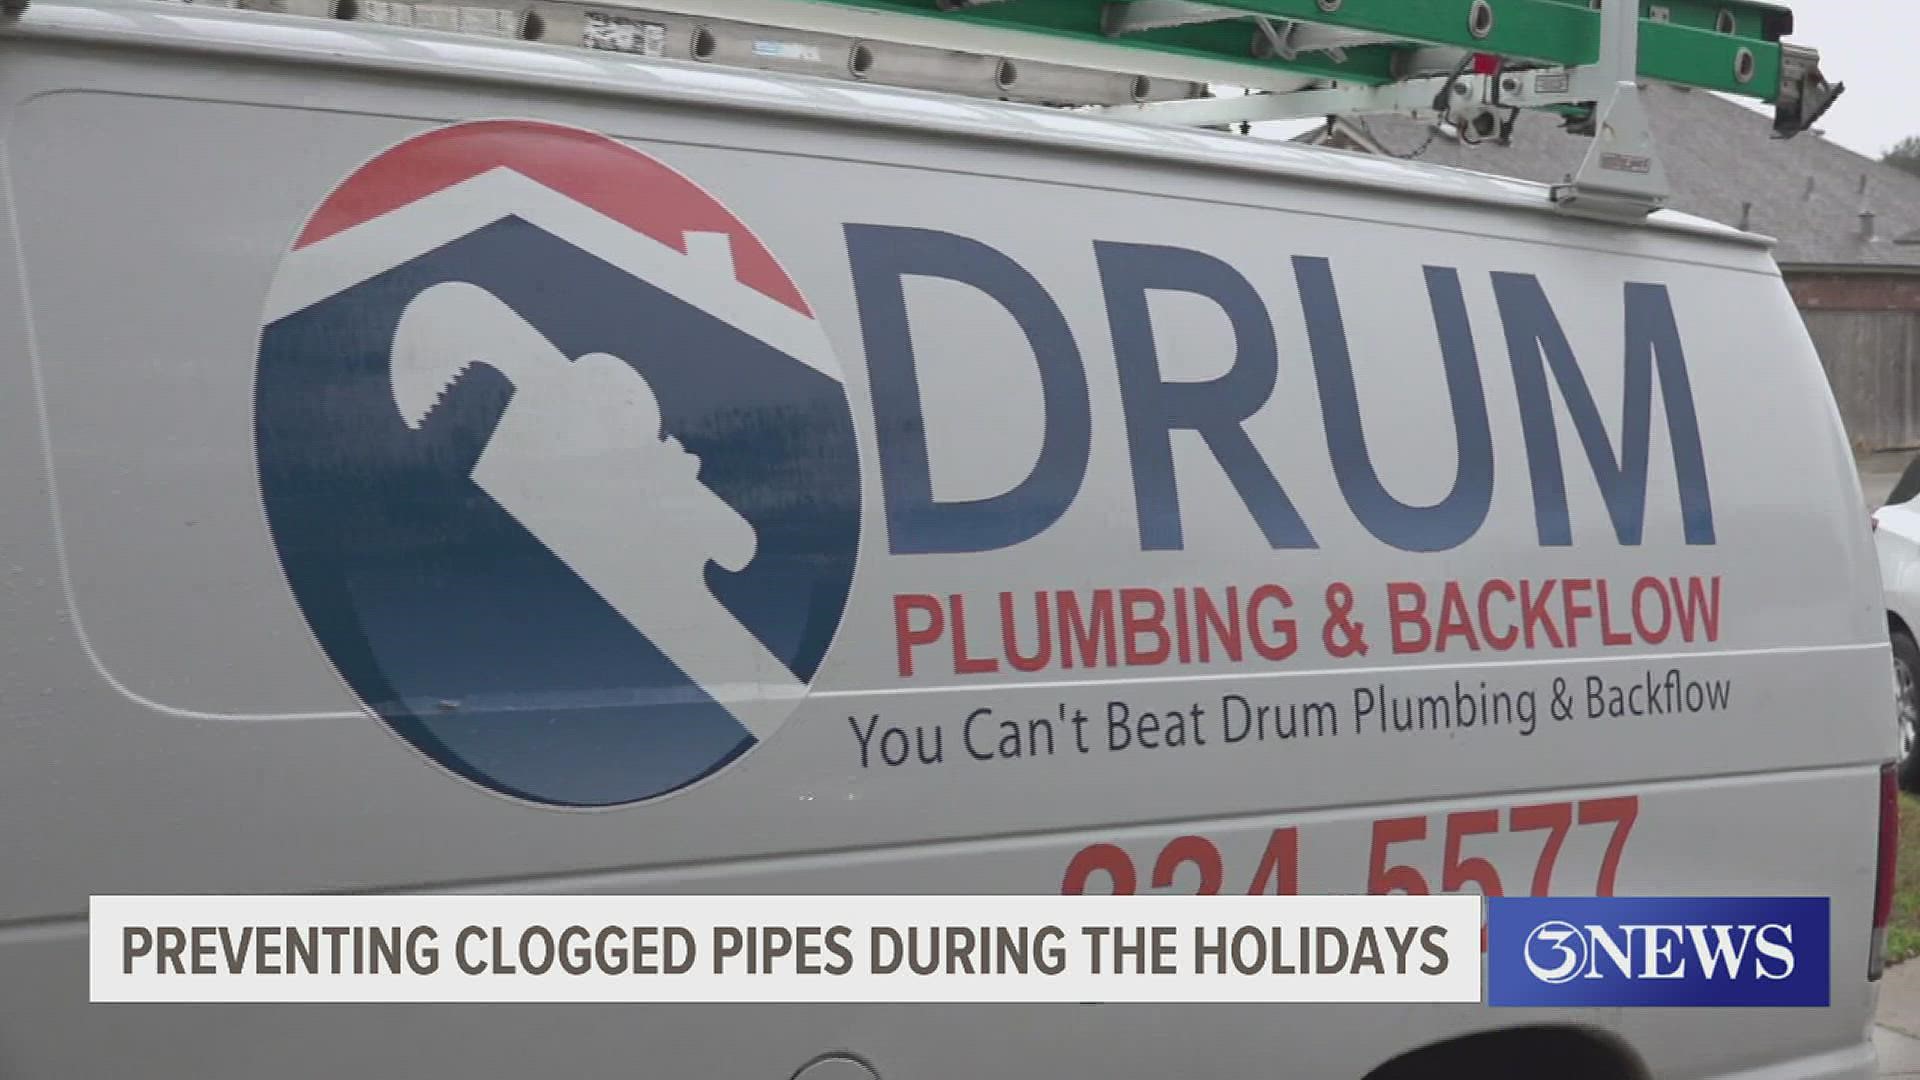 Drum Plumbing and Backflow said drain stoppages can be prevented in multiple ways.